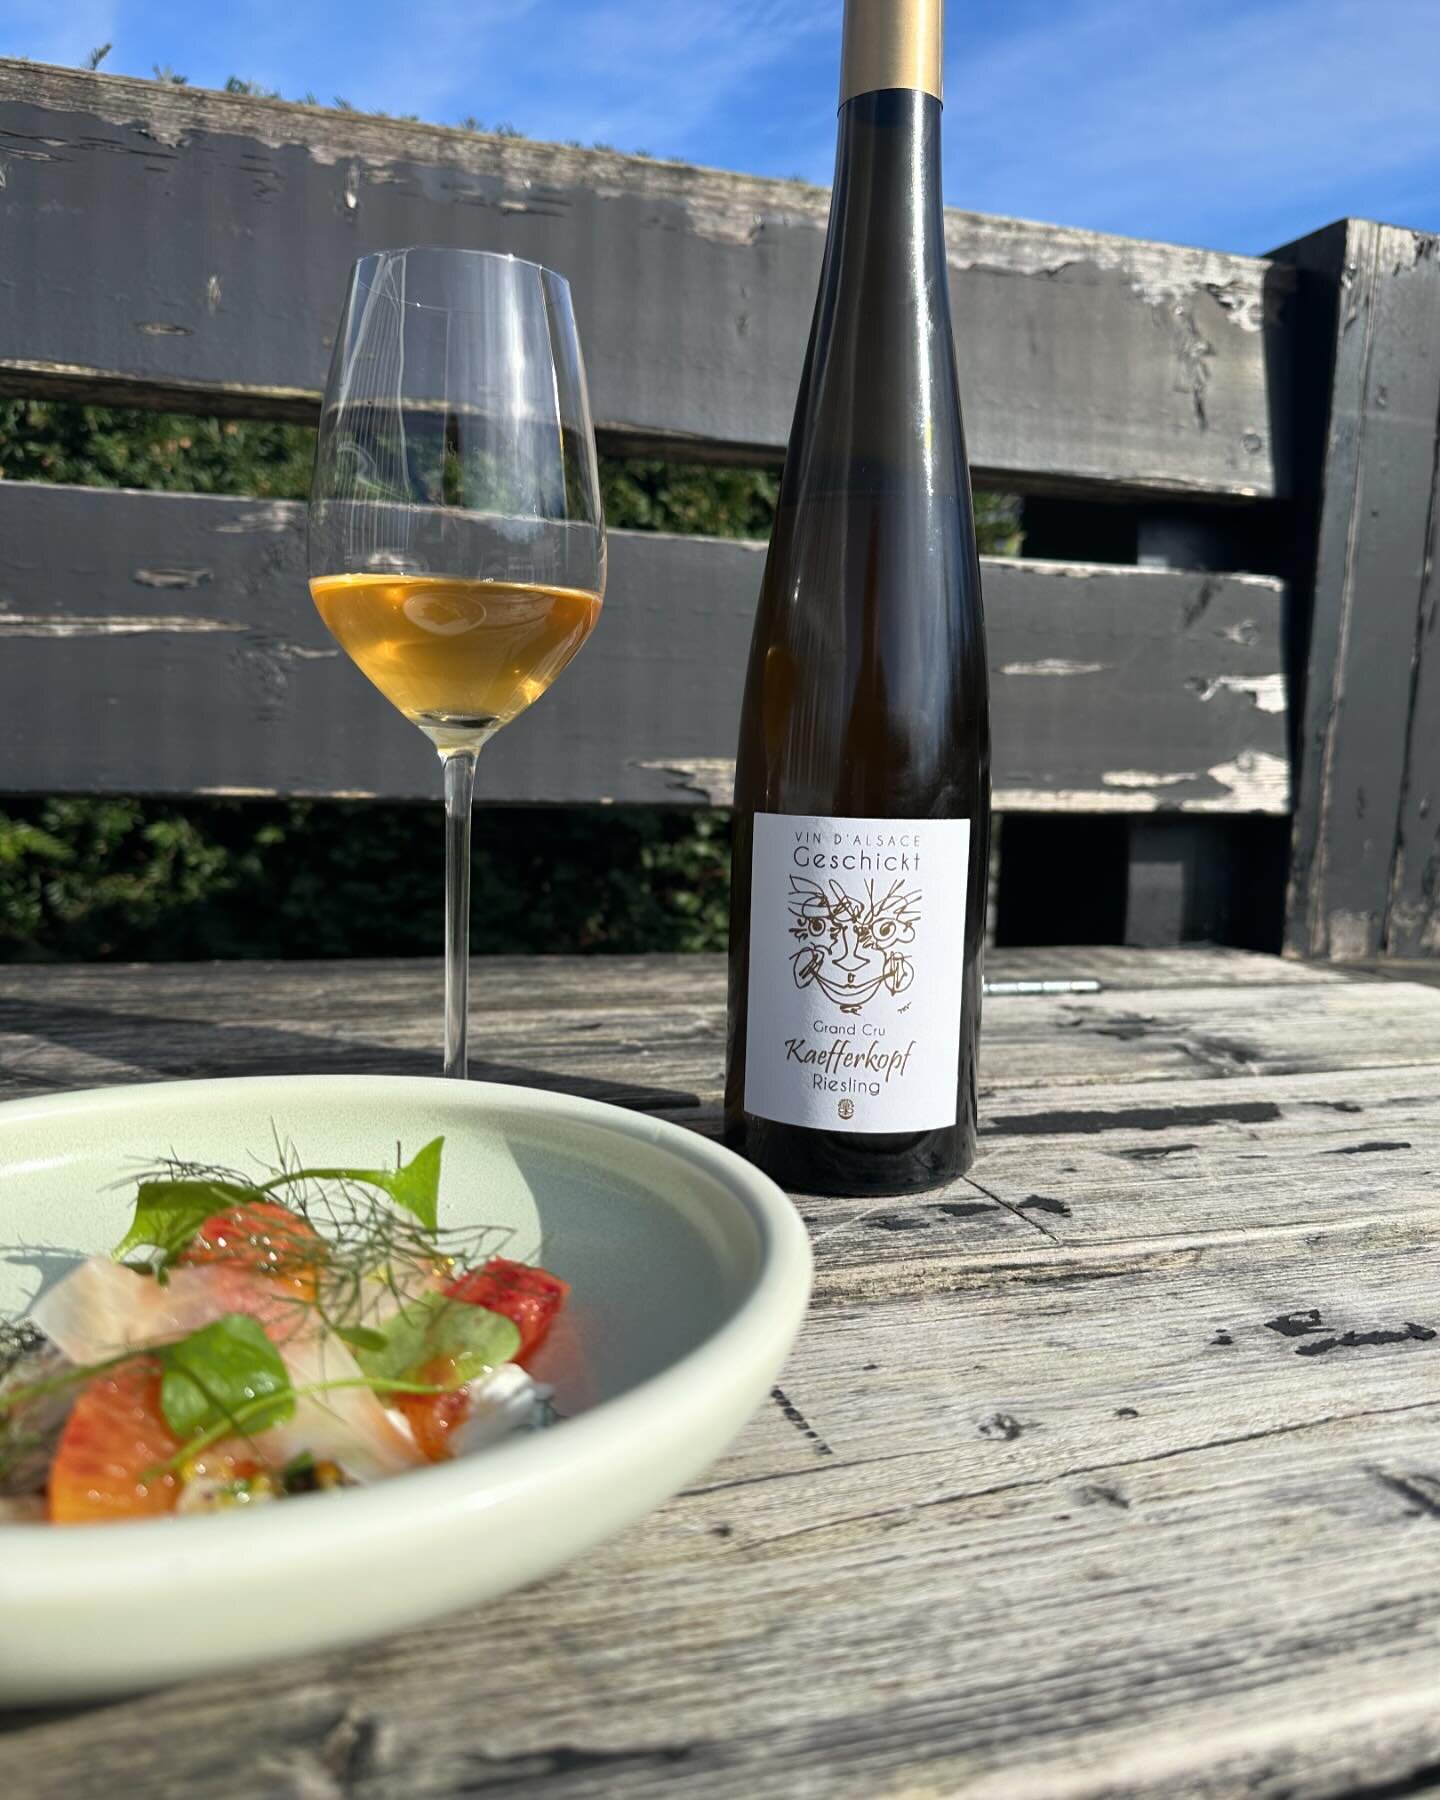 Burrata, blood orange, kosho &amp; pistachio paired with Grand Cru Riesling from Geschickt. Kaefferkopf&rsquo;s hill adds depth, body, and minerality to this Riesling. A 3-year lees maturation unveils thrilling hints of candied lemon and ginger. By t